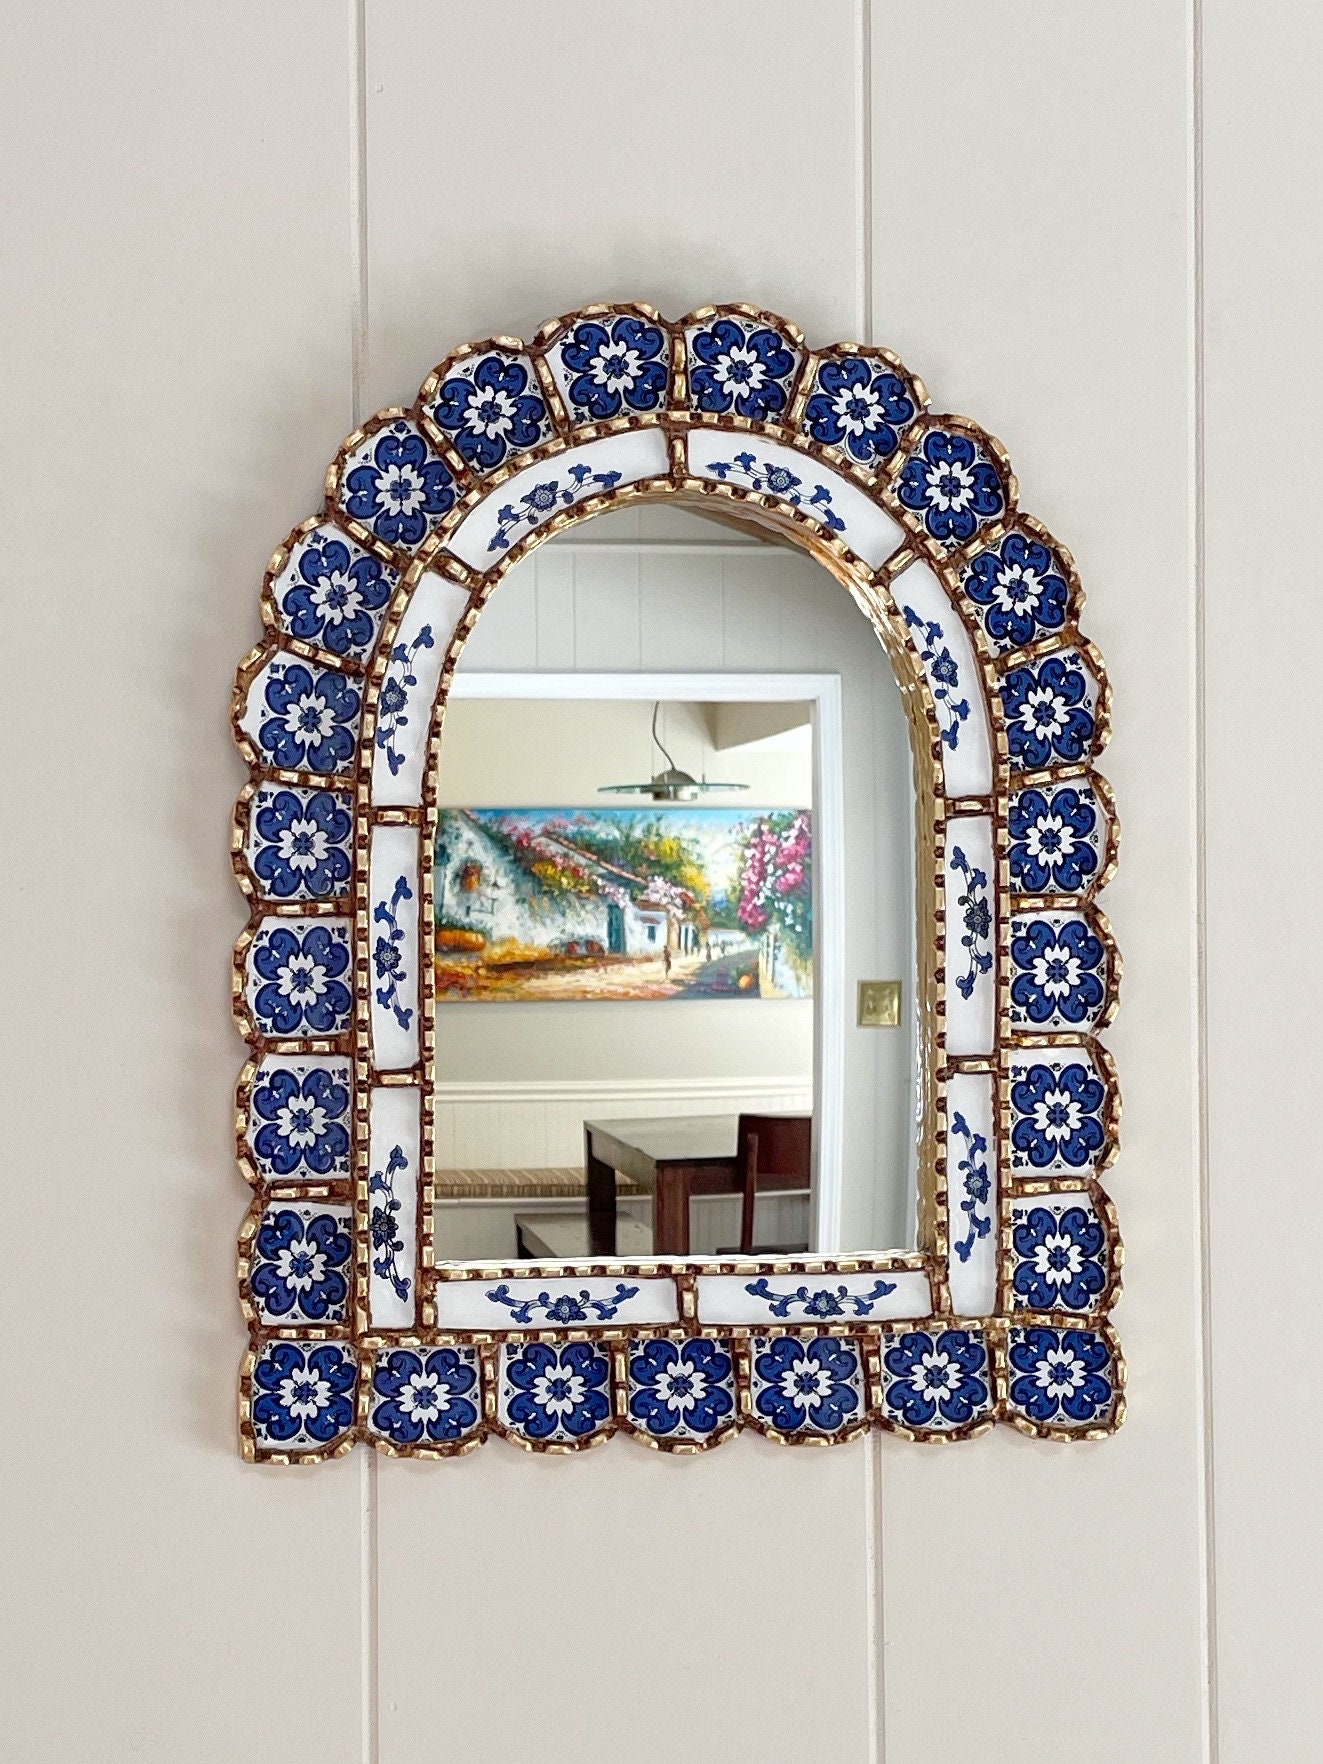 Glass Tile Mirror Frame is available in 12-inch and 1-inch - Arad Branding